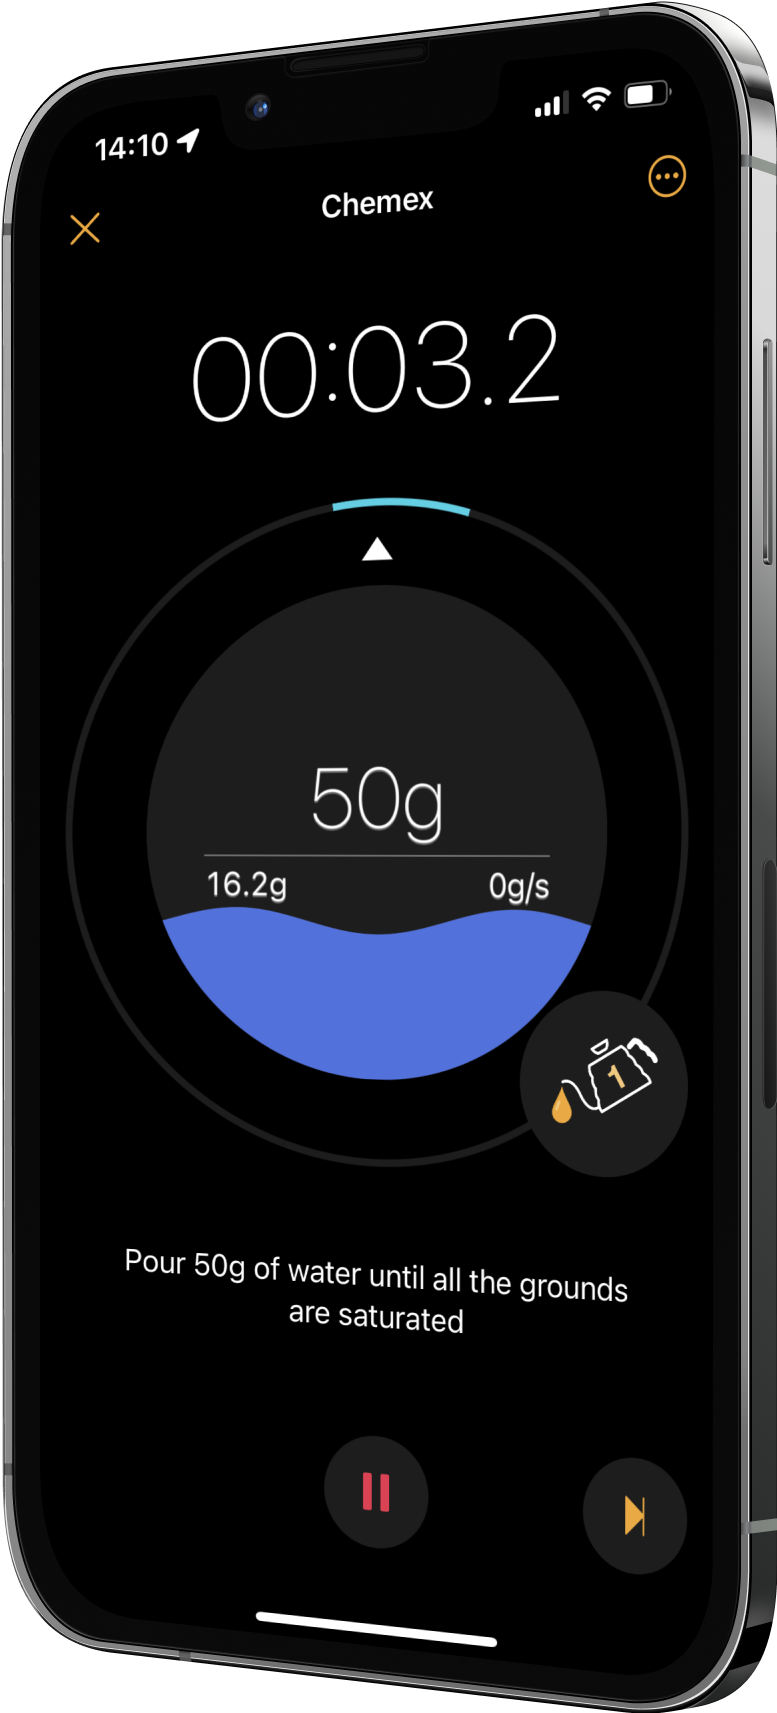 An image of the phone showing the Filtru timer screen